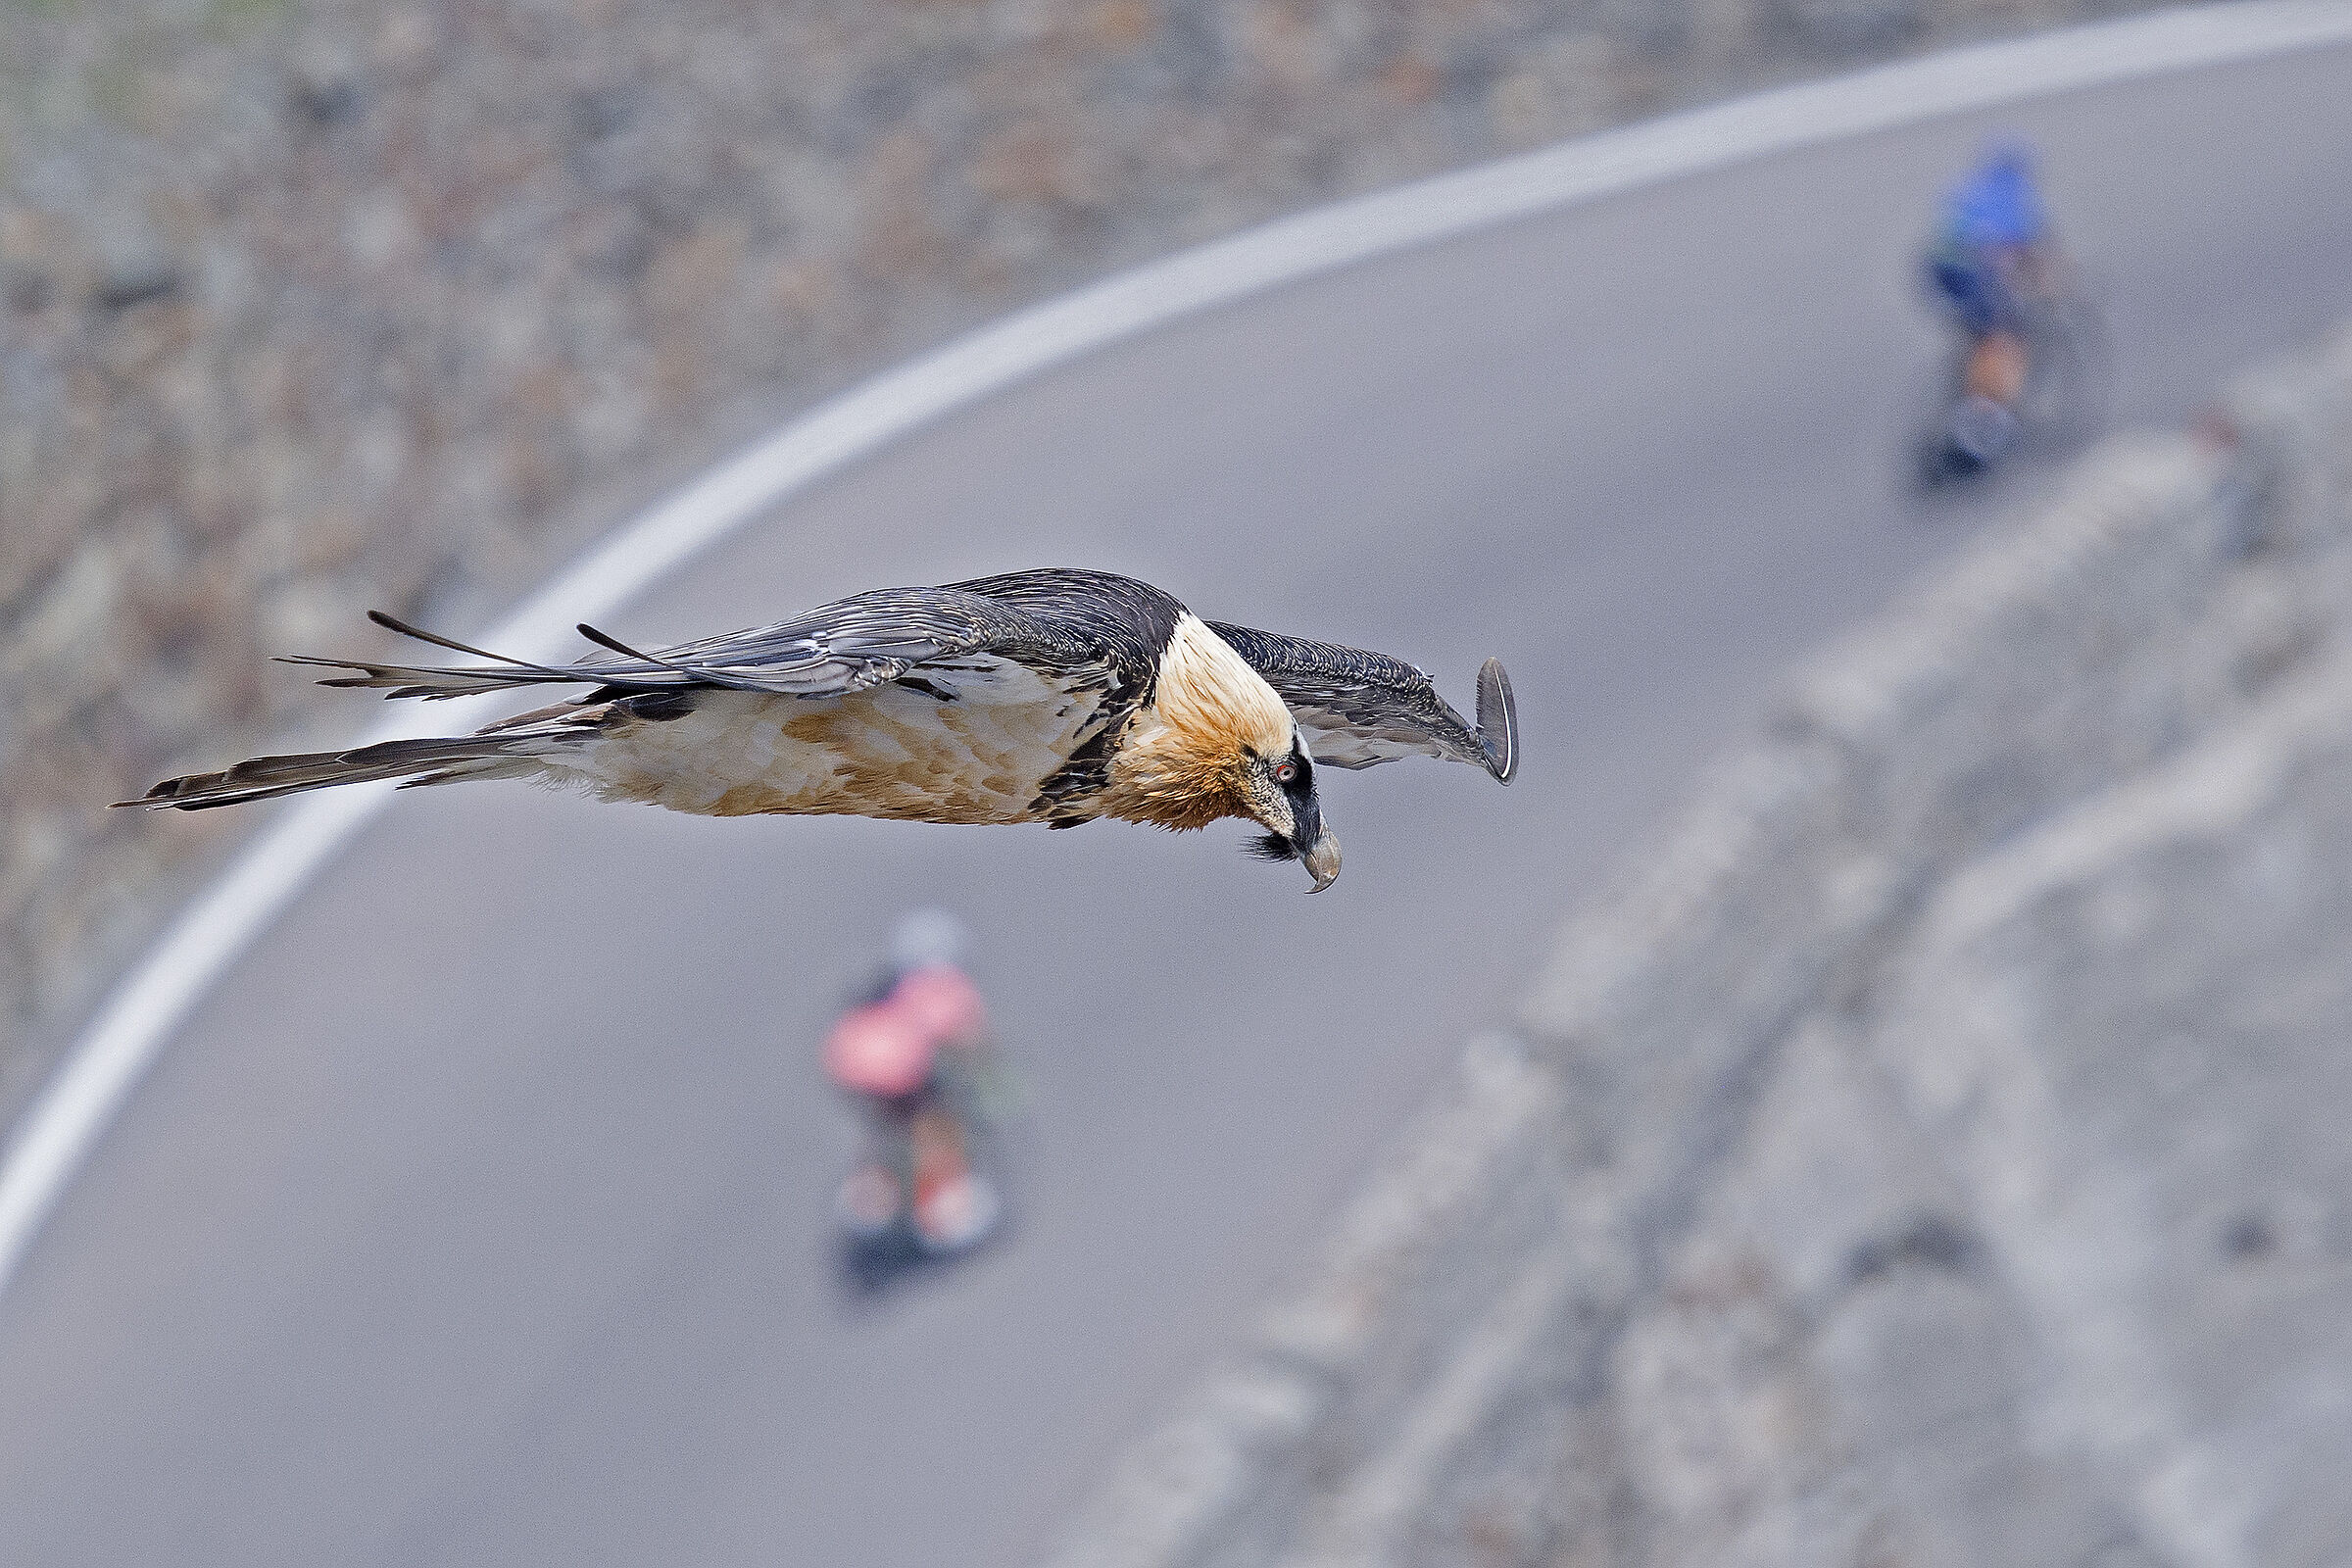 The Bearded Vulture of the Stelvio...